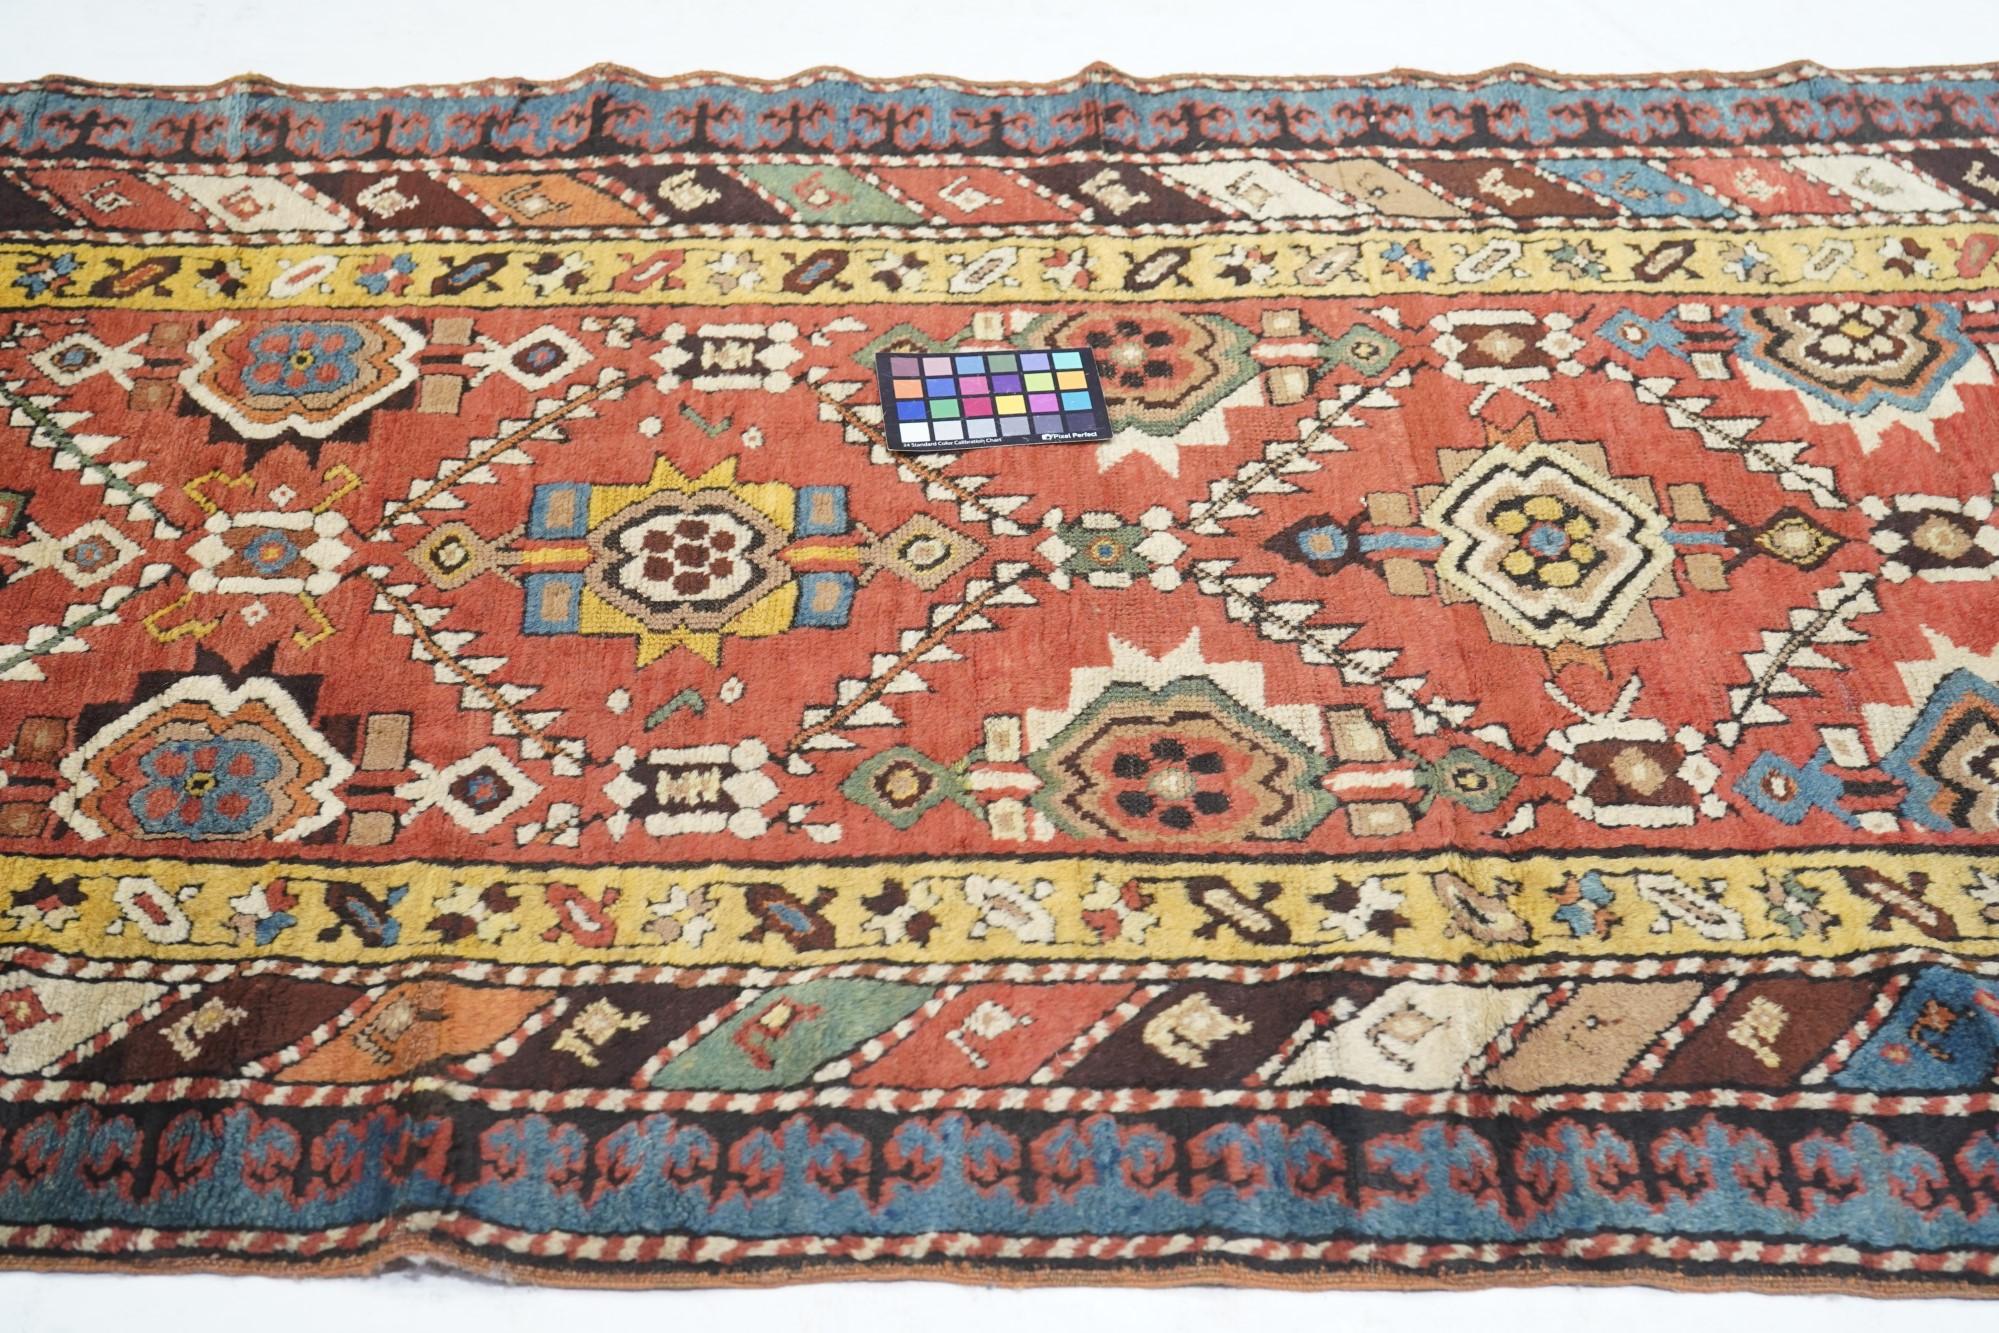 Antique Kazak Rug 3'8'' x 8'1''. With a warm madder red field divided evenly by a doubly stepped lattice into reserves centred by pinched octagonal elements. An allover textile pattern. Color diagonal stripe middle border and bitonal keyhole